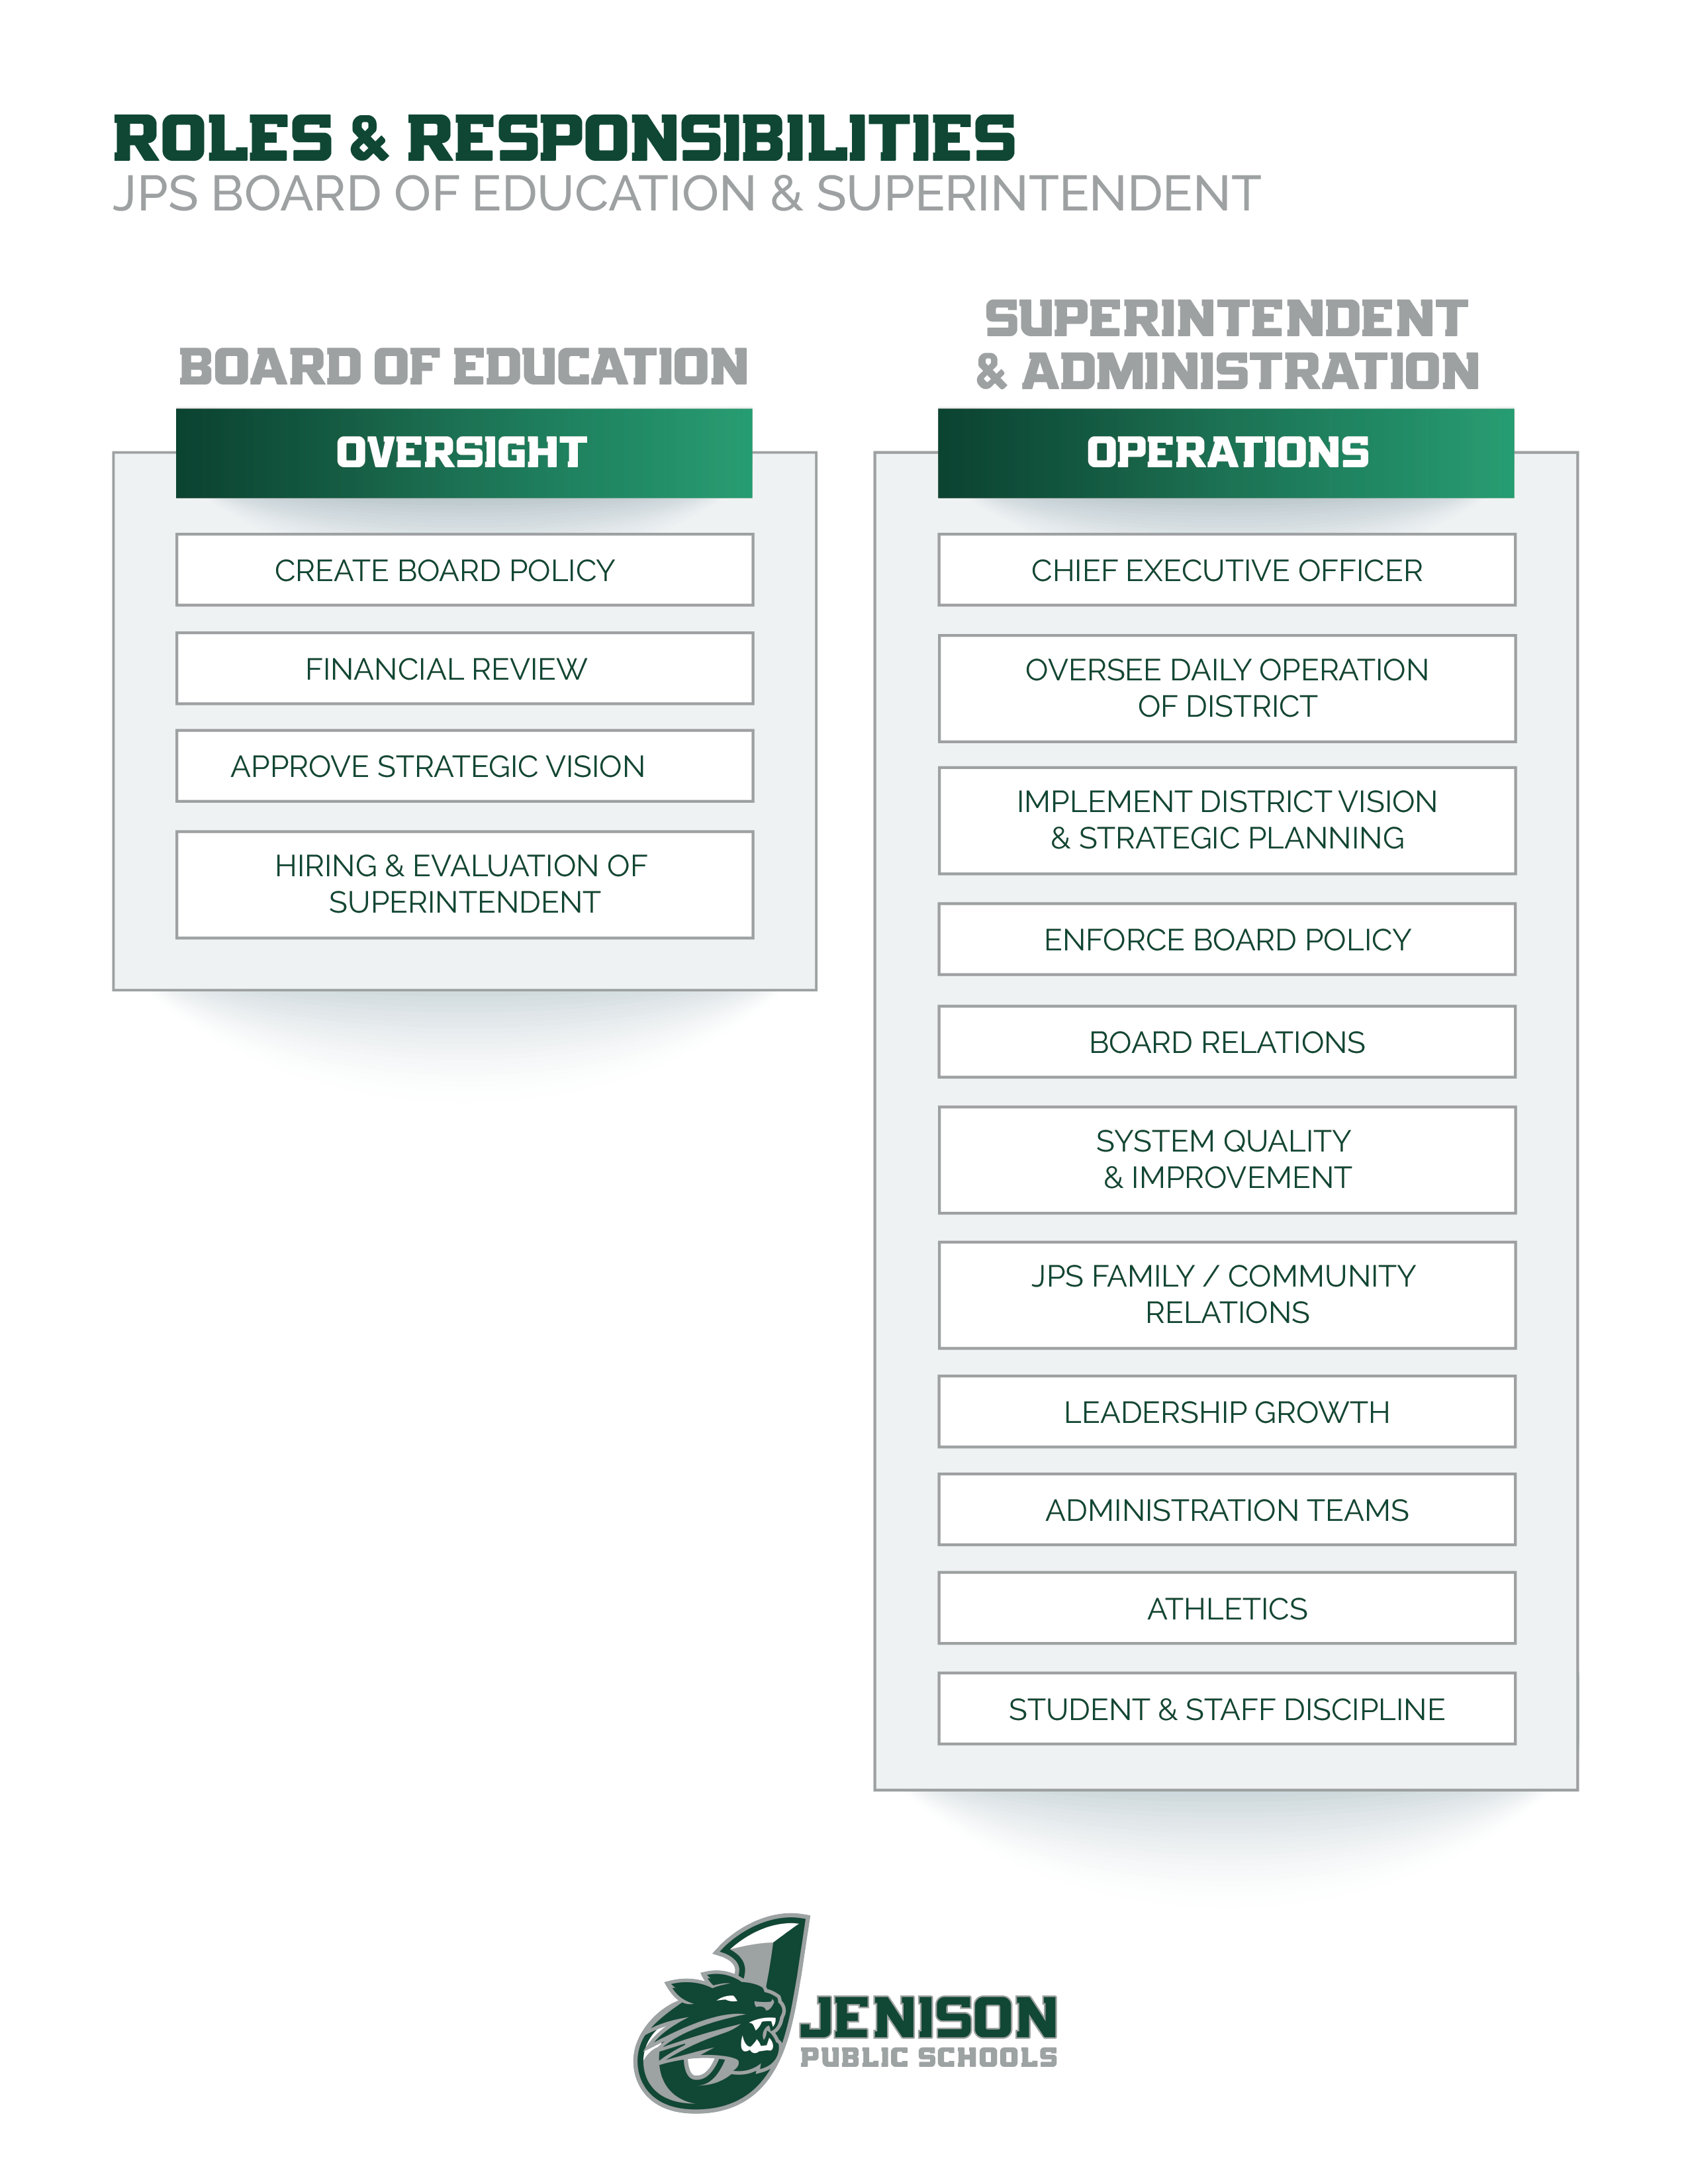 Roles of Board and Superintendent